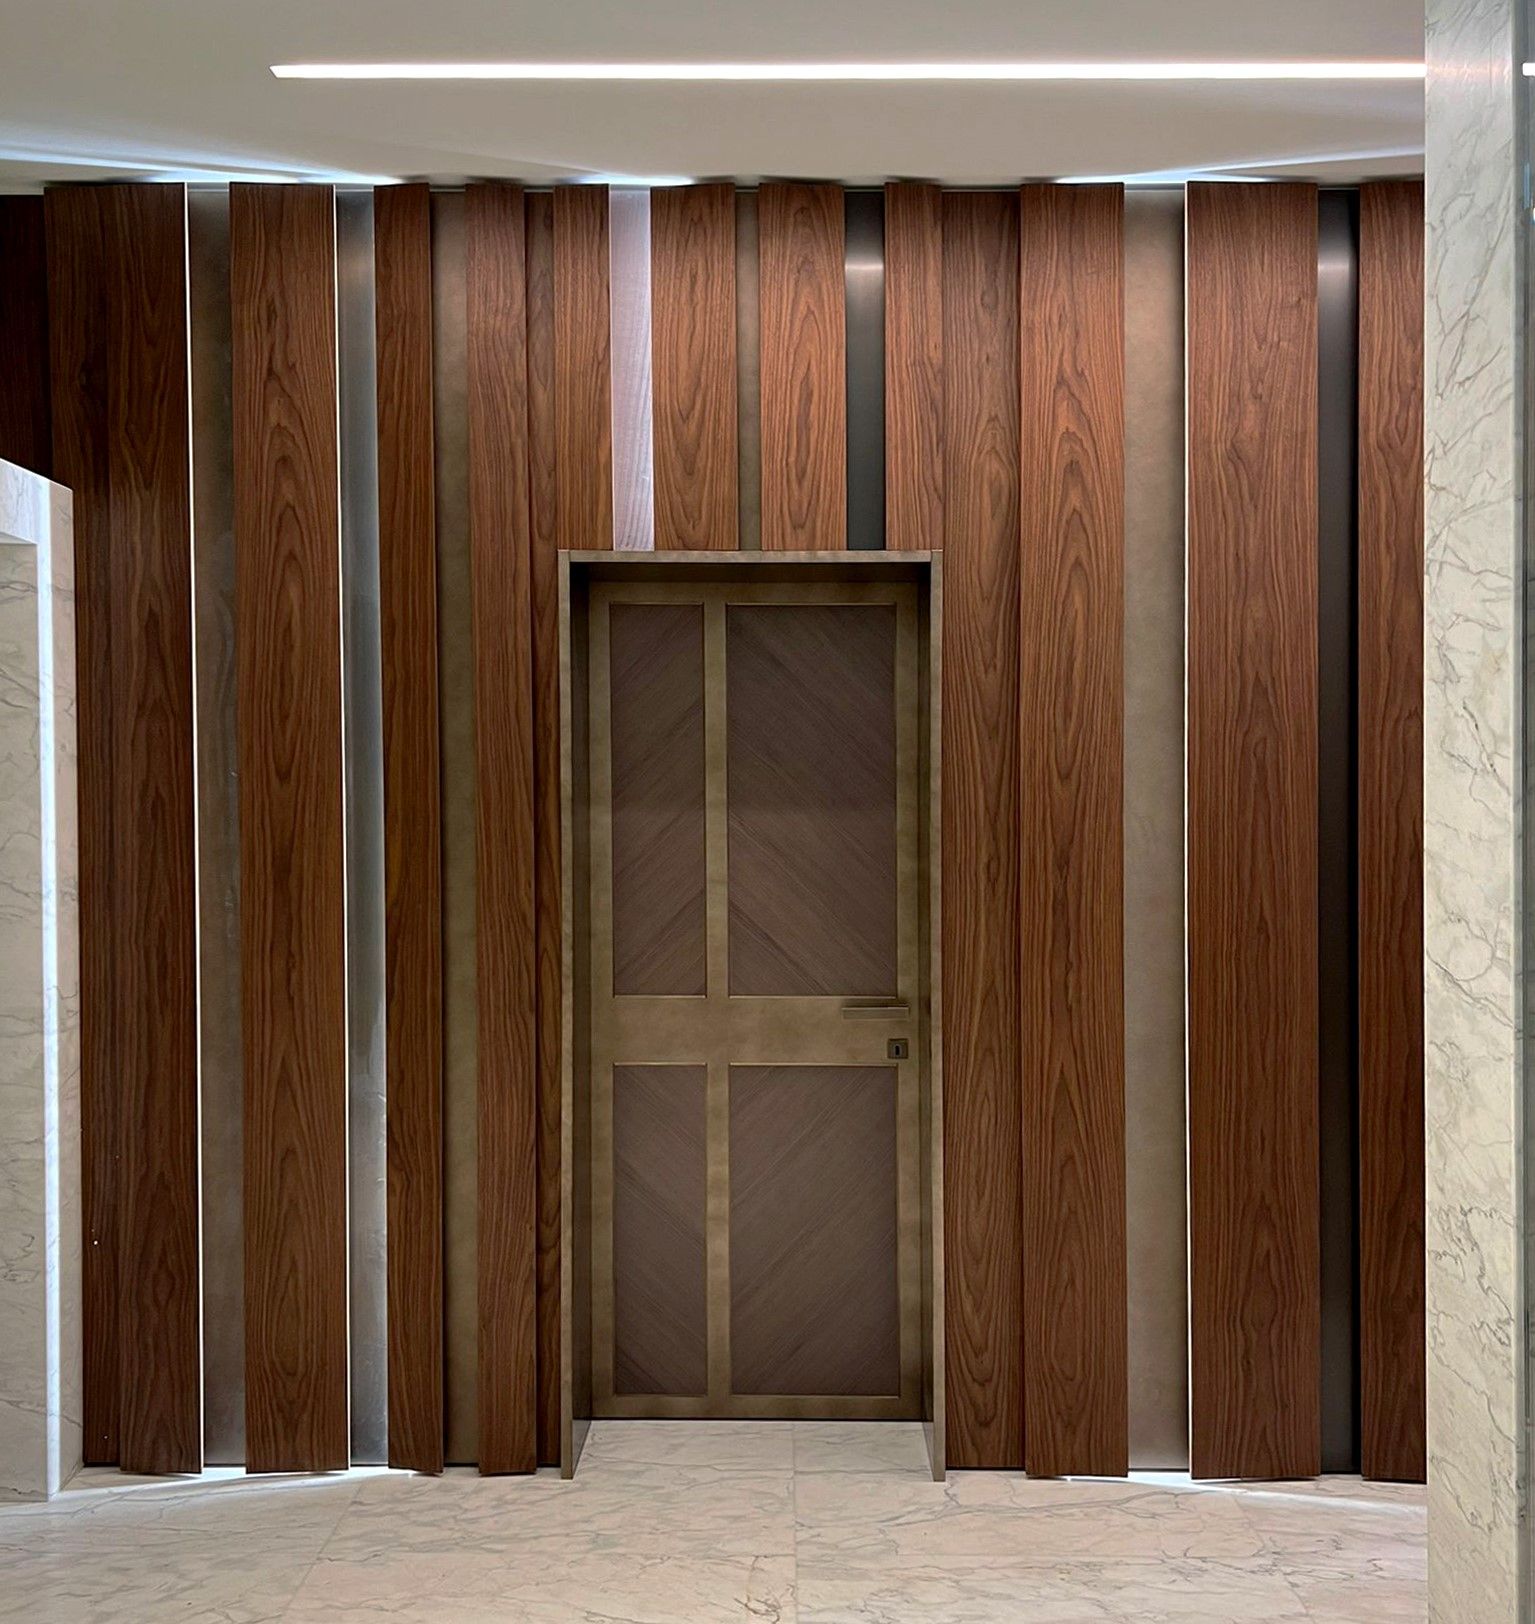 The wooden door is of modern decor, designed for a Peverelli project